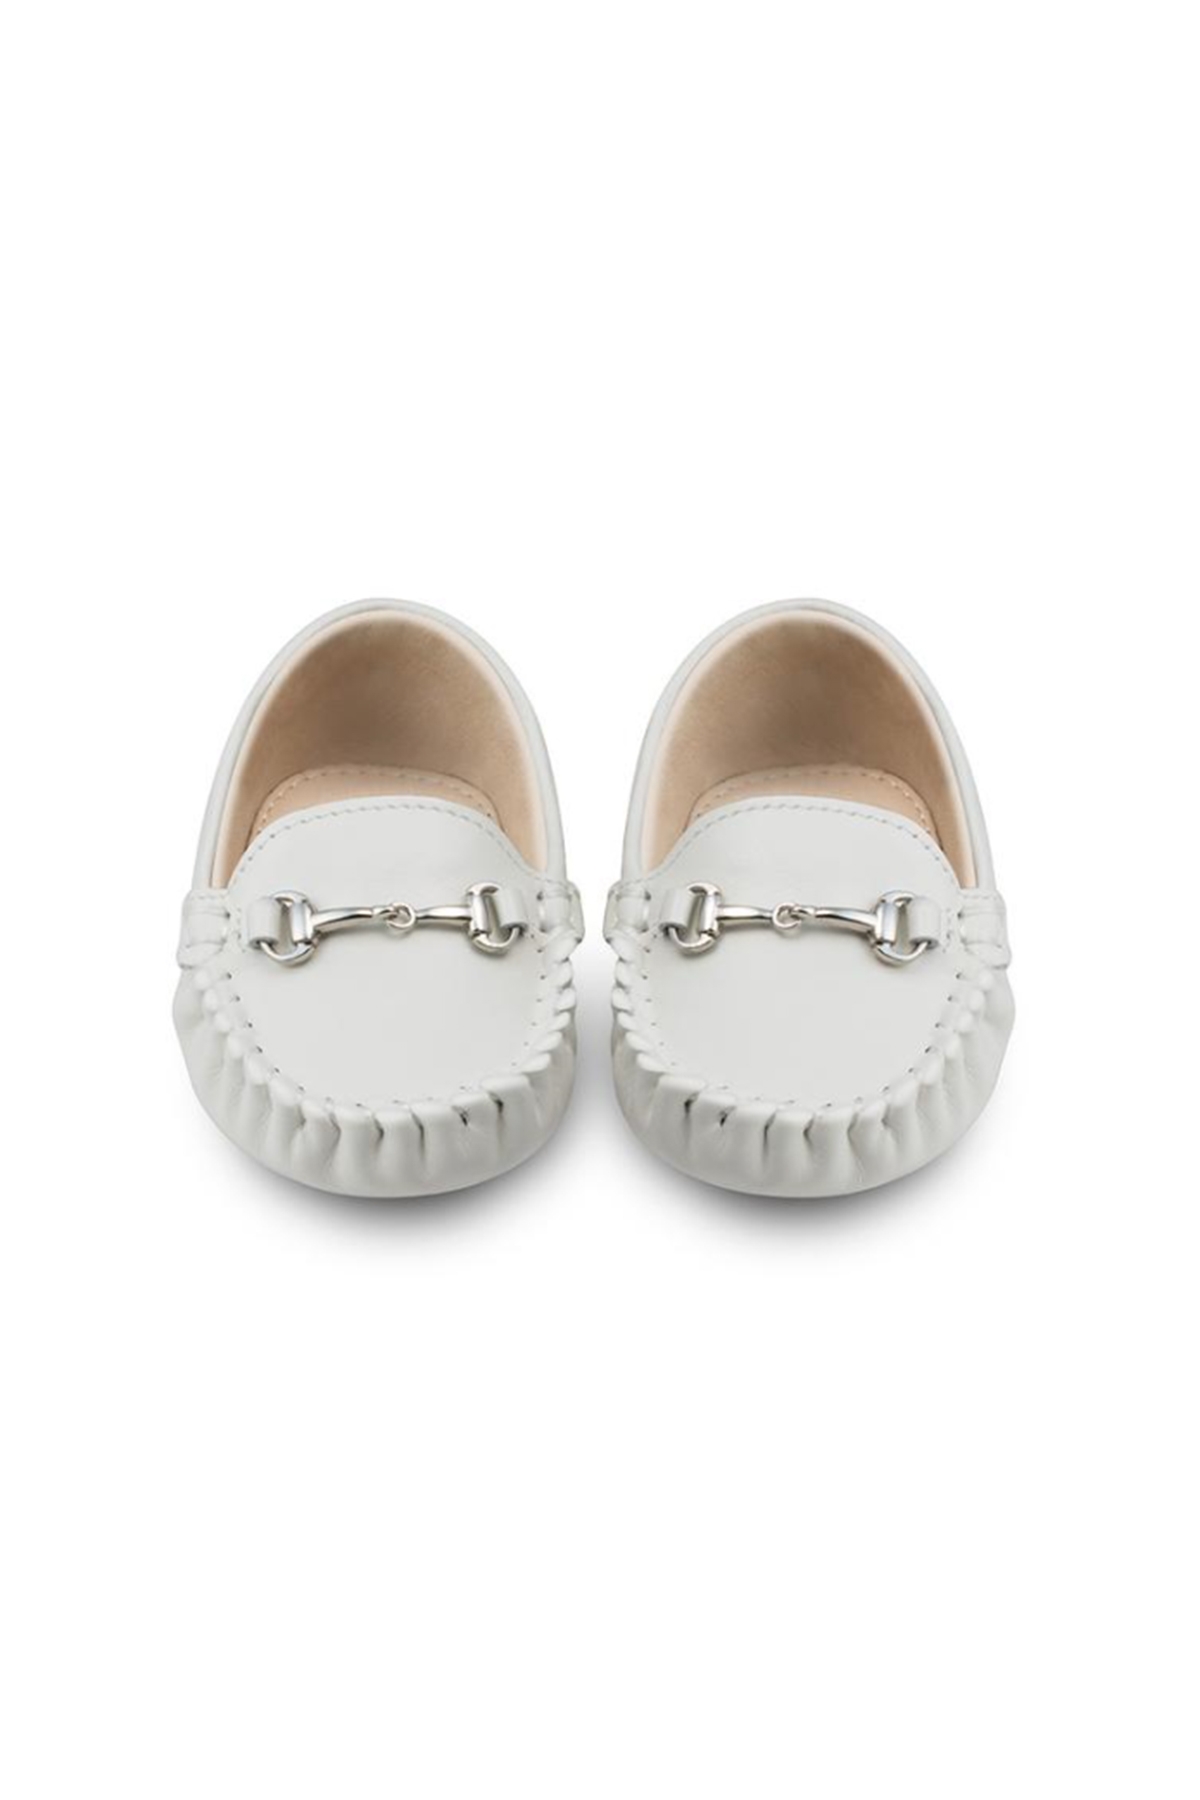 LUCCA WHITE BABY LOAFERS - Princess Boutique